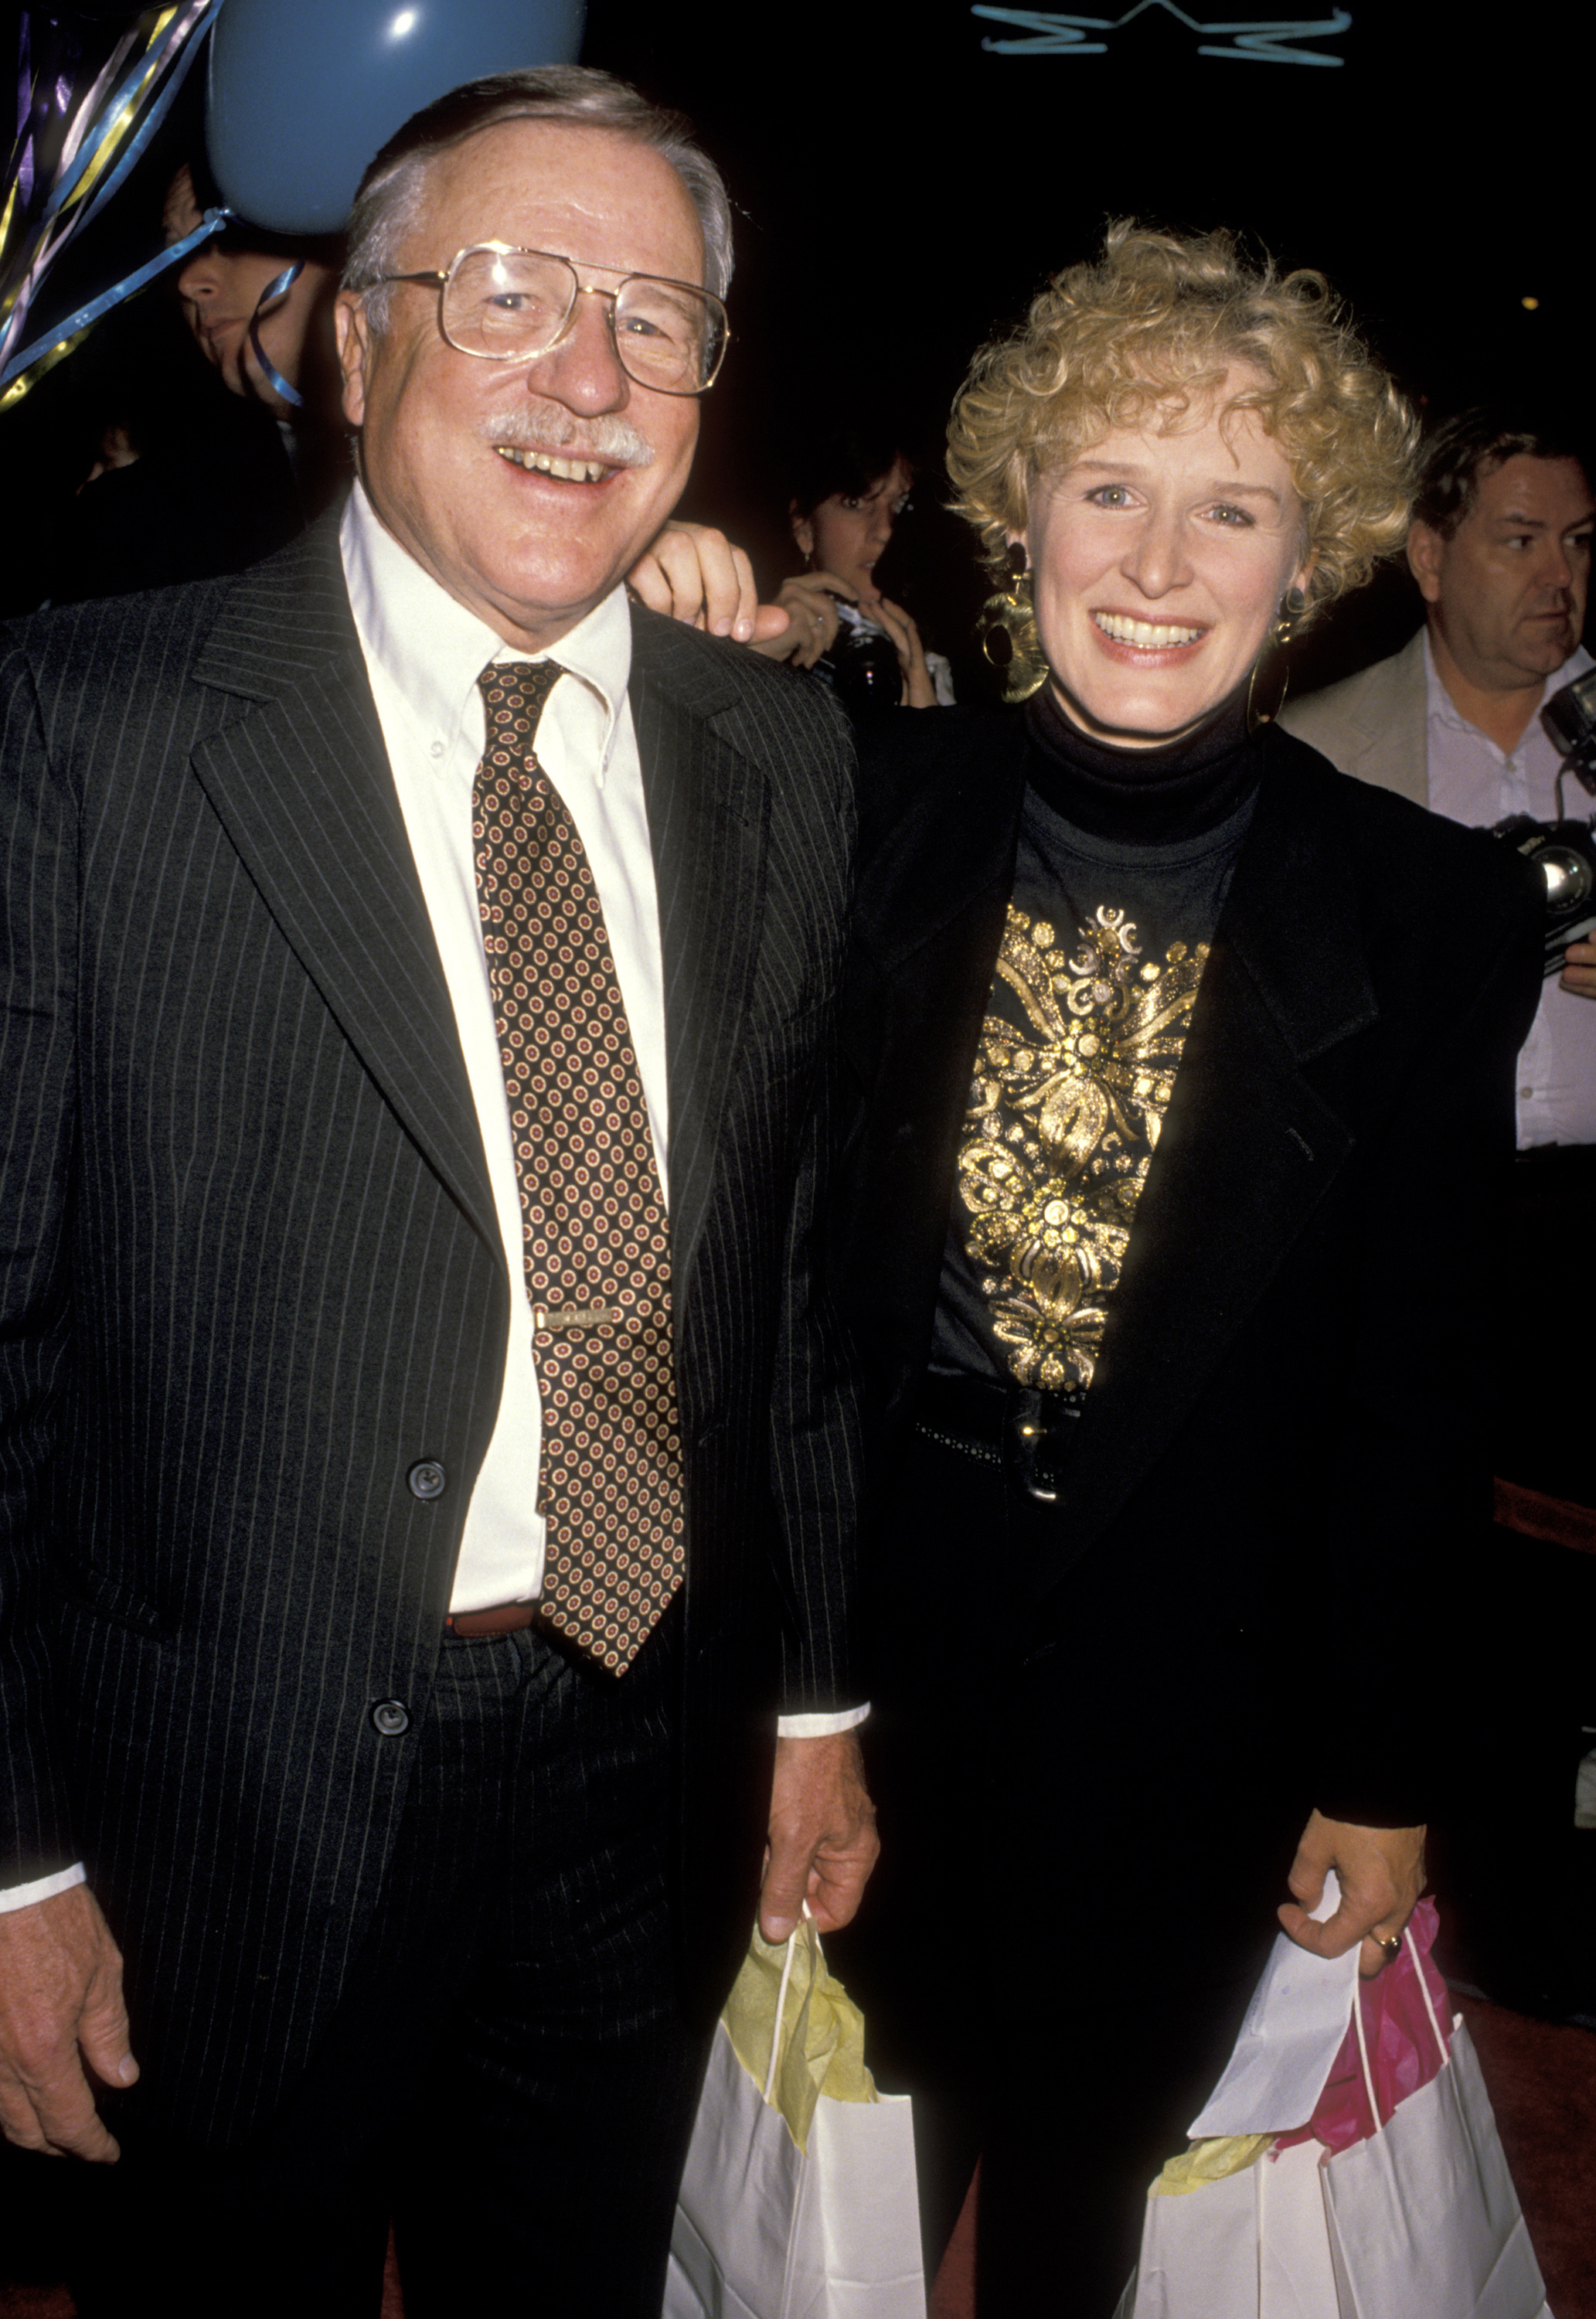 Glenn Close and William Close during the premiere party for "Immediate Family" in Hollywood, California on October 24, 1989 | Source: Getty Images